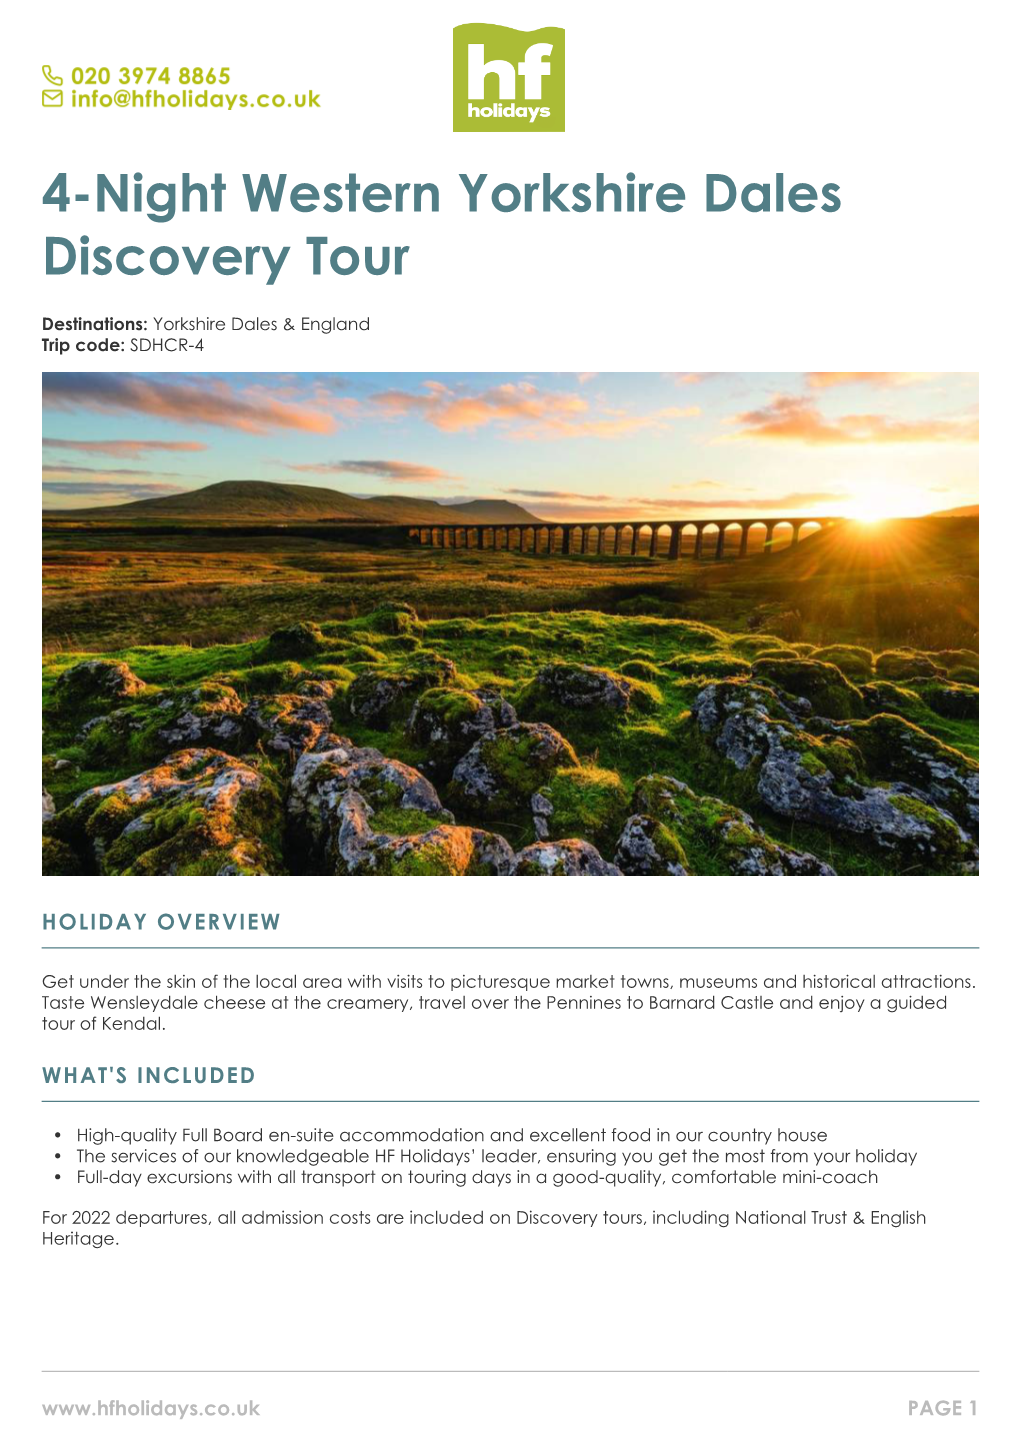 4-Night Western Yorkshire Dales Discovery Tour